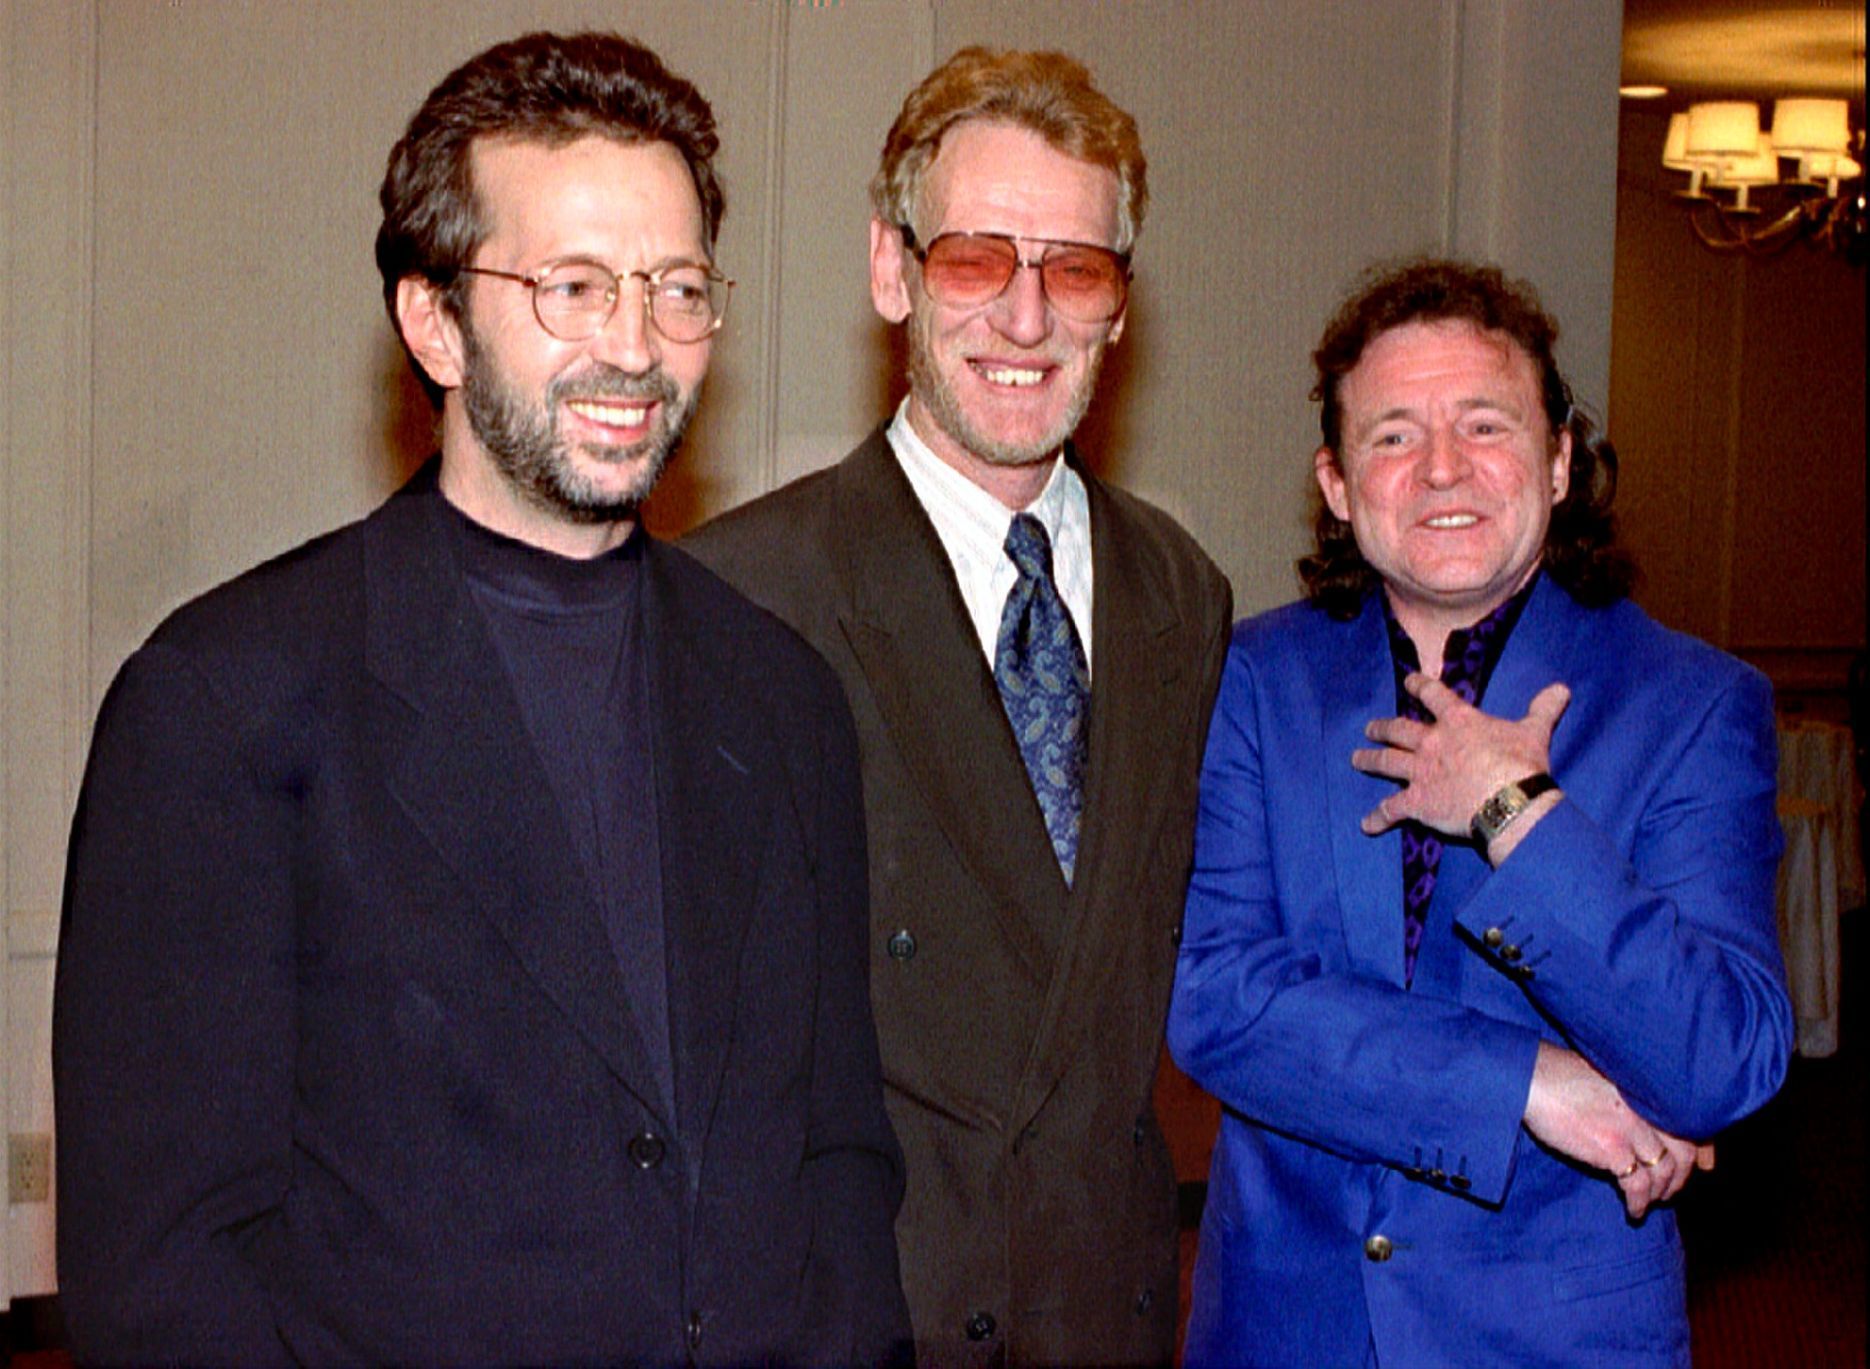 File picture shows Eric Clapton, Ginger Baker and Jack Bruce after being inducted in the Rock and Roll Hall of Fame during ceremonies in Los Angeles